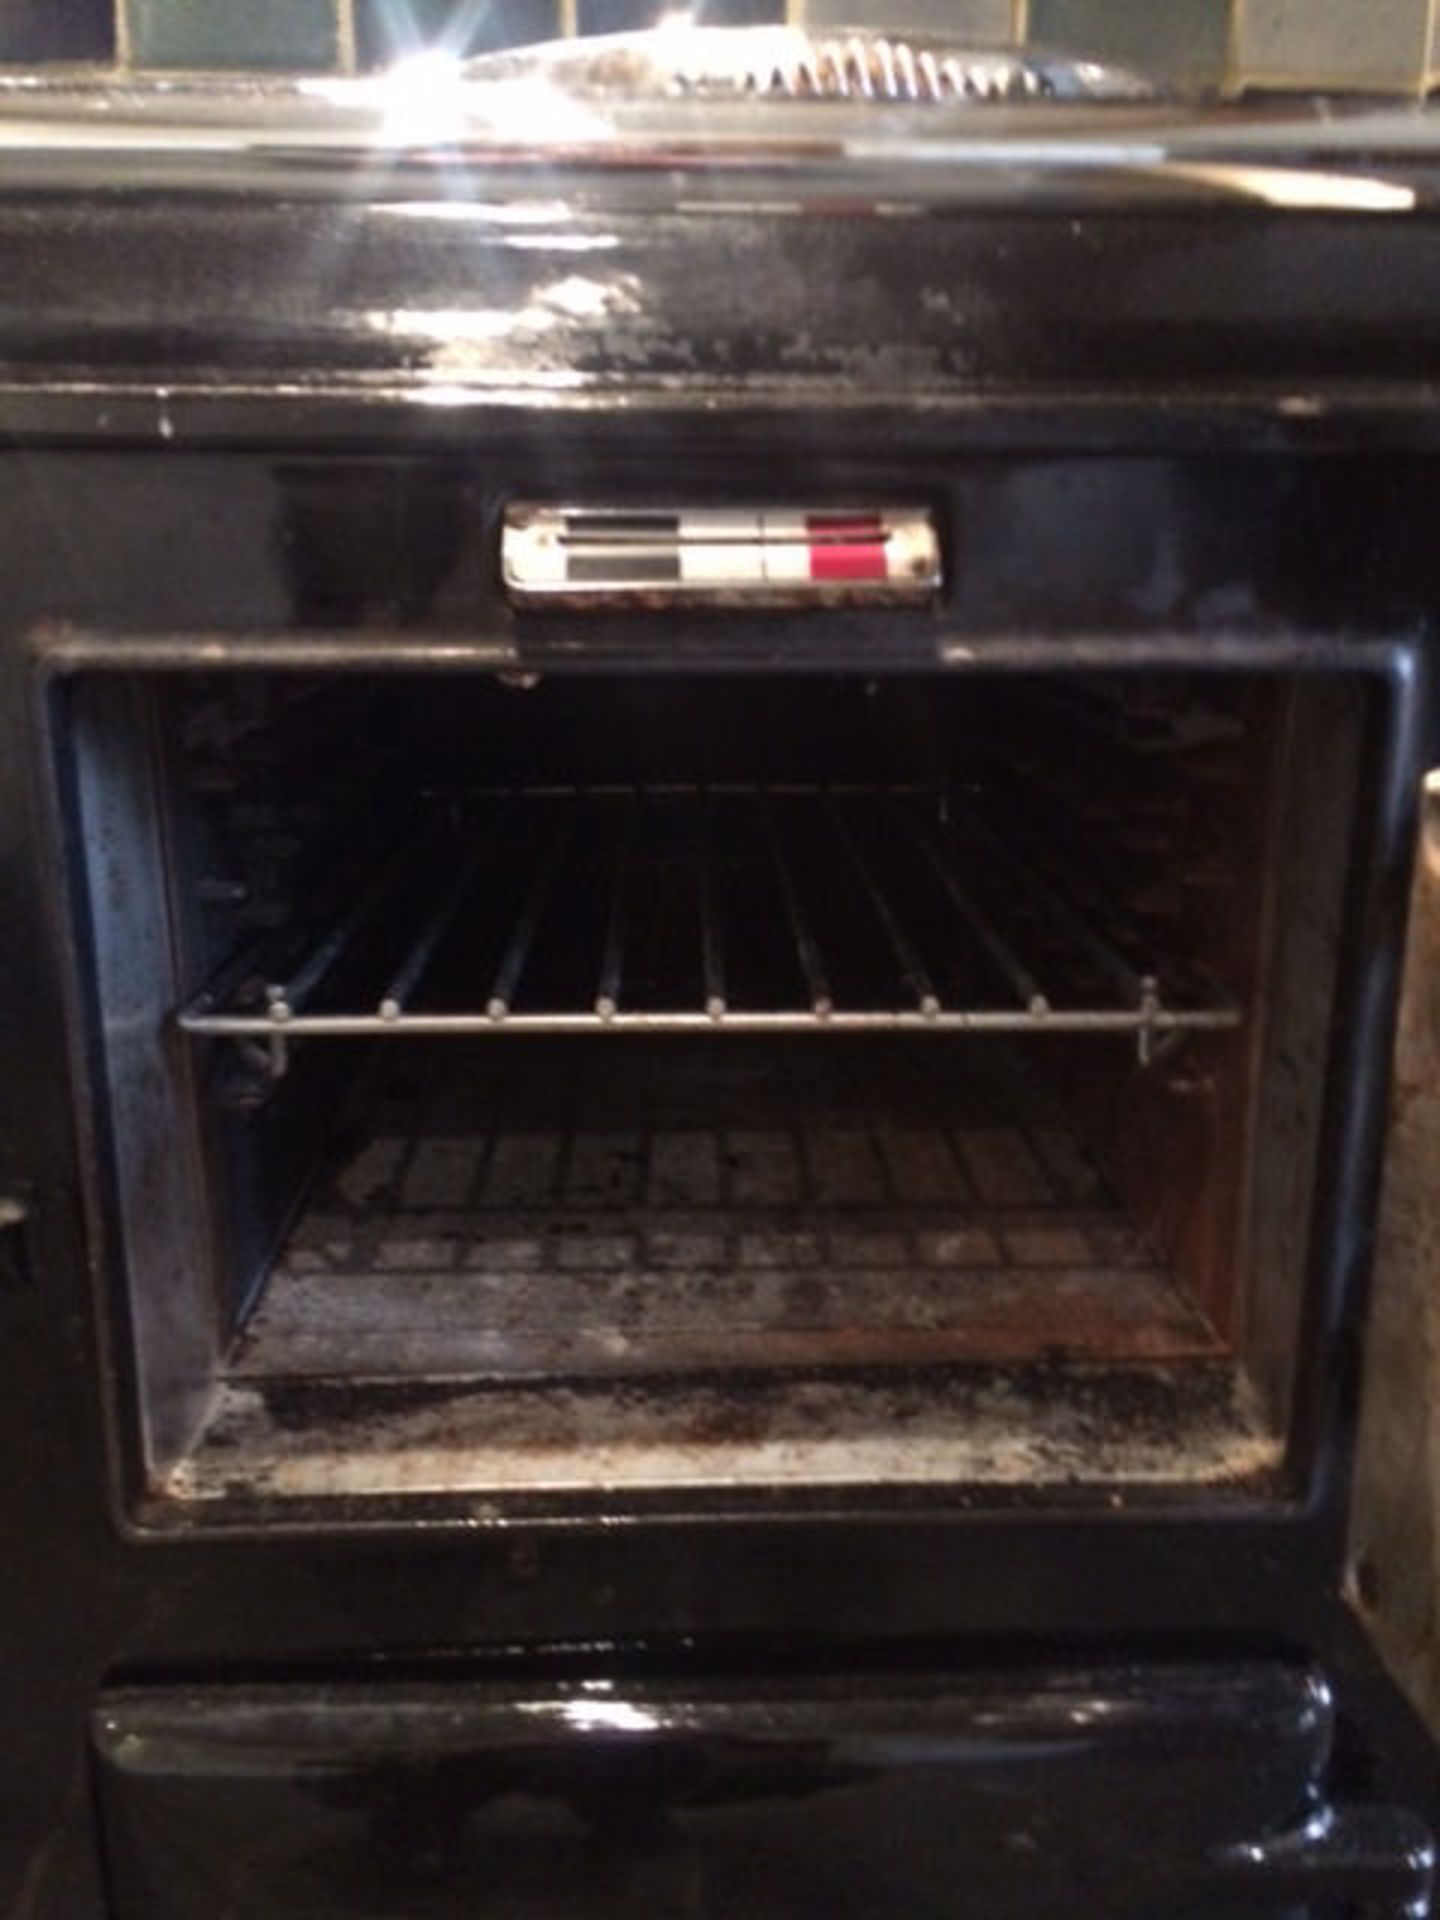 1 x Aga 2-Oven Gas Range Cooker - Cast Iron With Black Enamel Finish - Preowned In Good Working Cond - Bild 3 aus 10